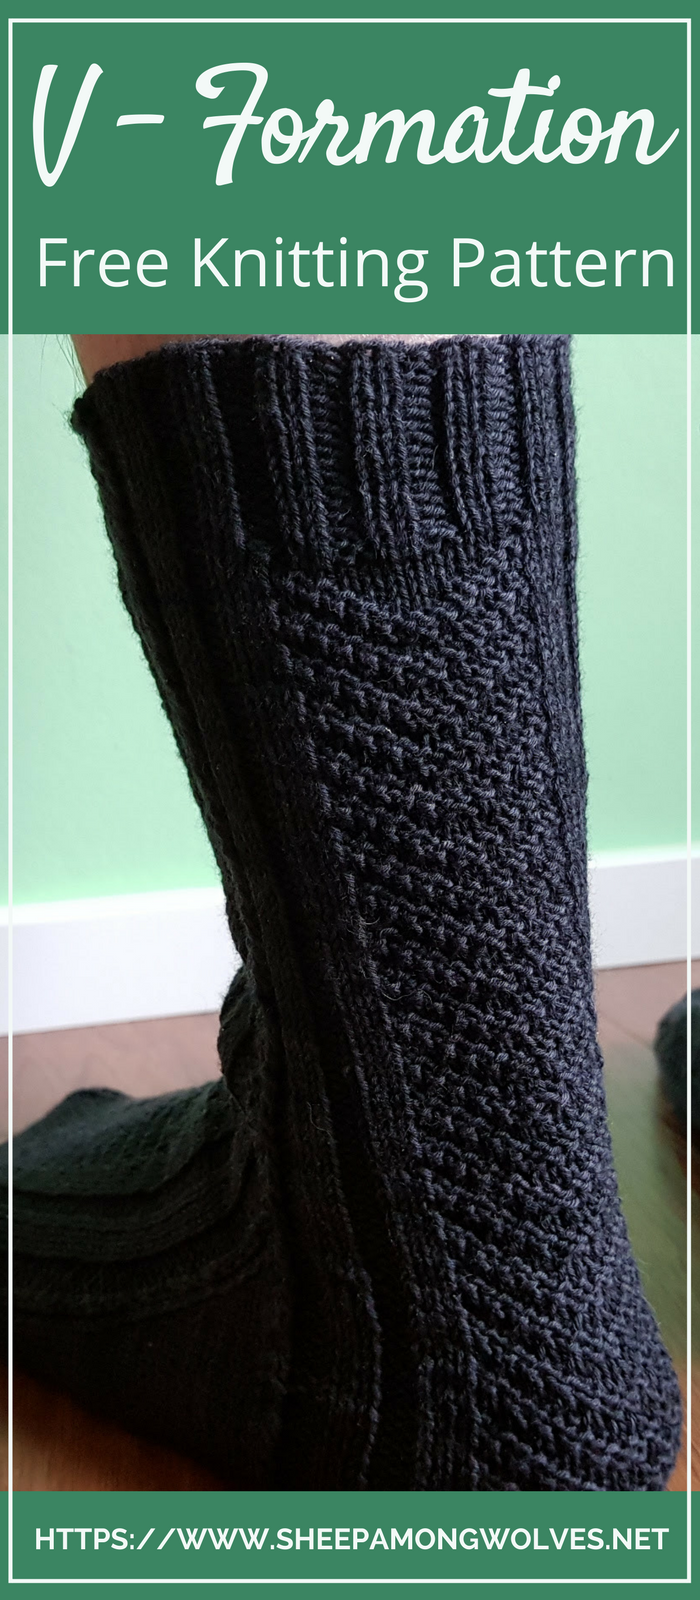 Free sock knitting pattern by Nadja Senoucci. Ravelry link included in the blog post. Click here and to get the pattern!